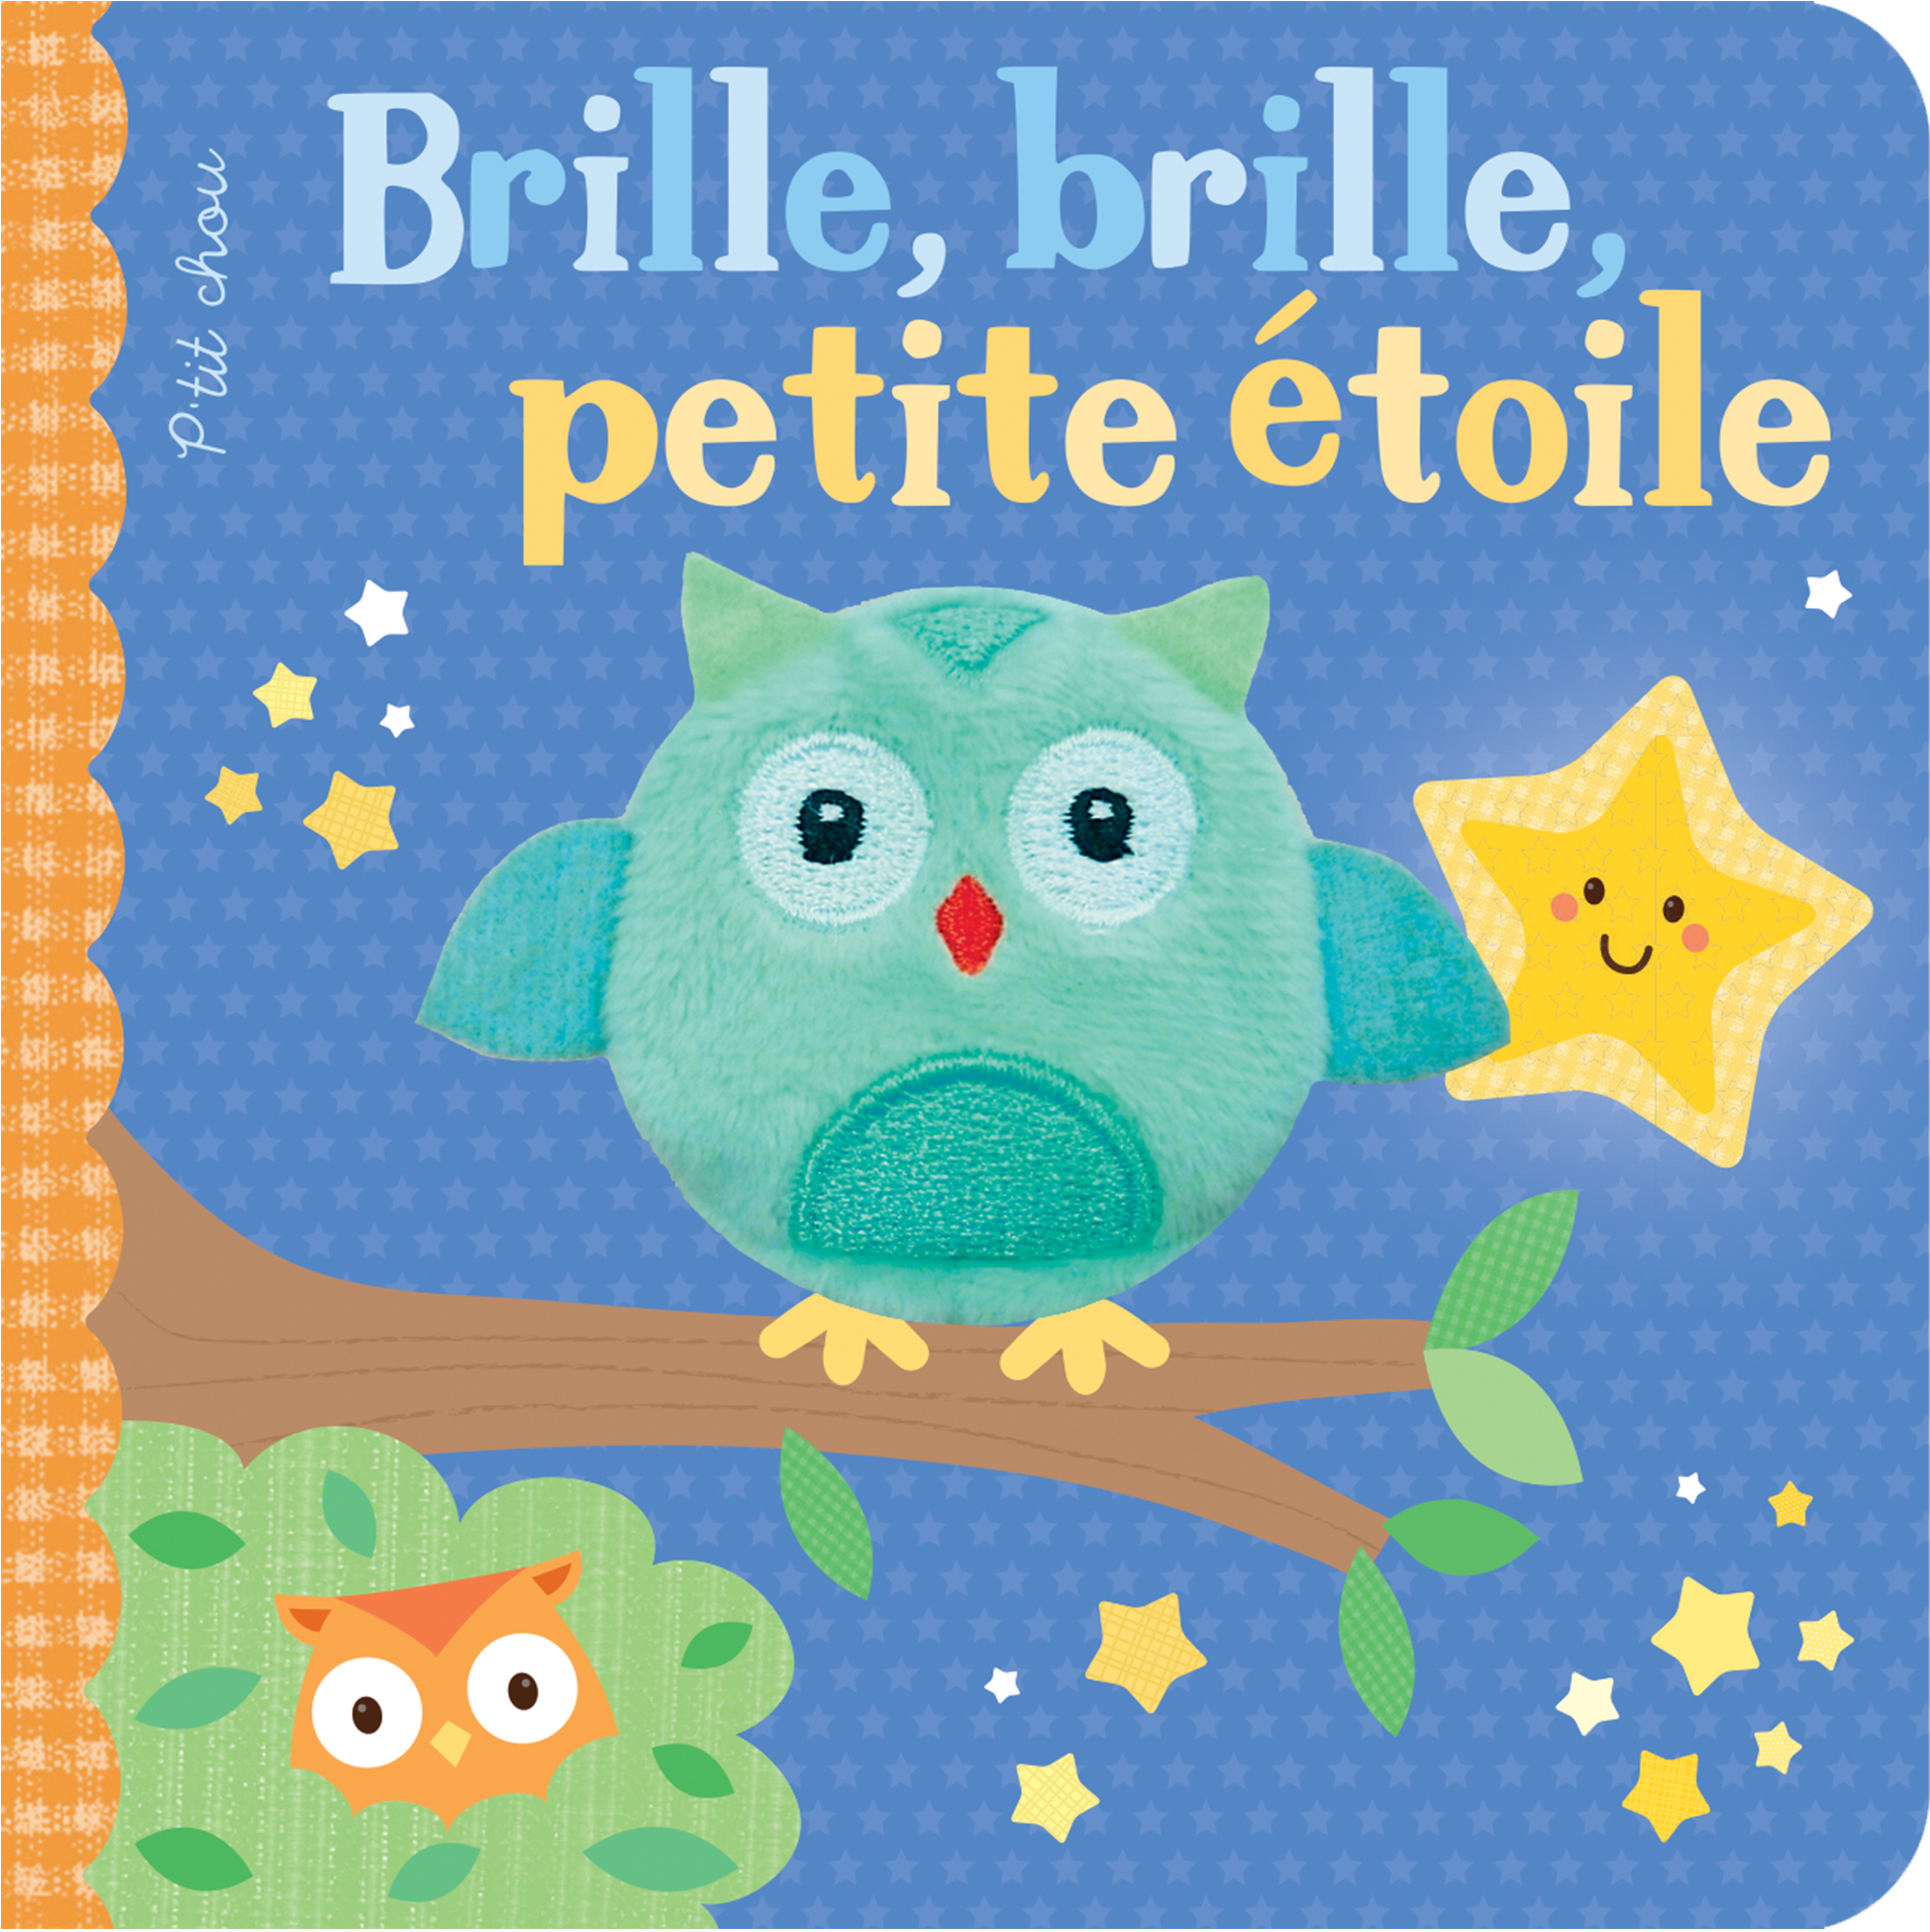 Brille, brille, petite étoile (Twinkle twinkle little star) french